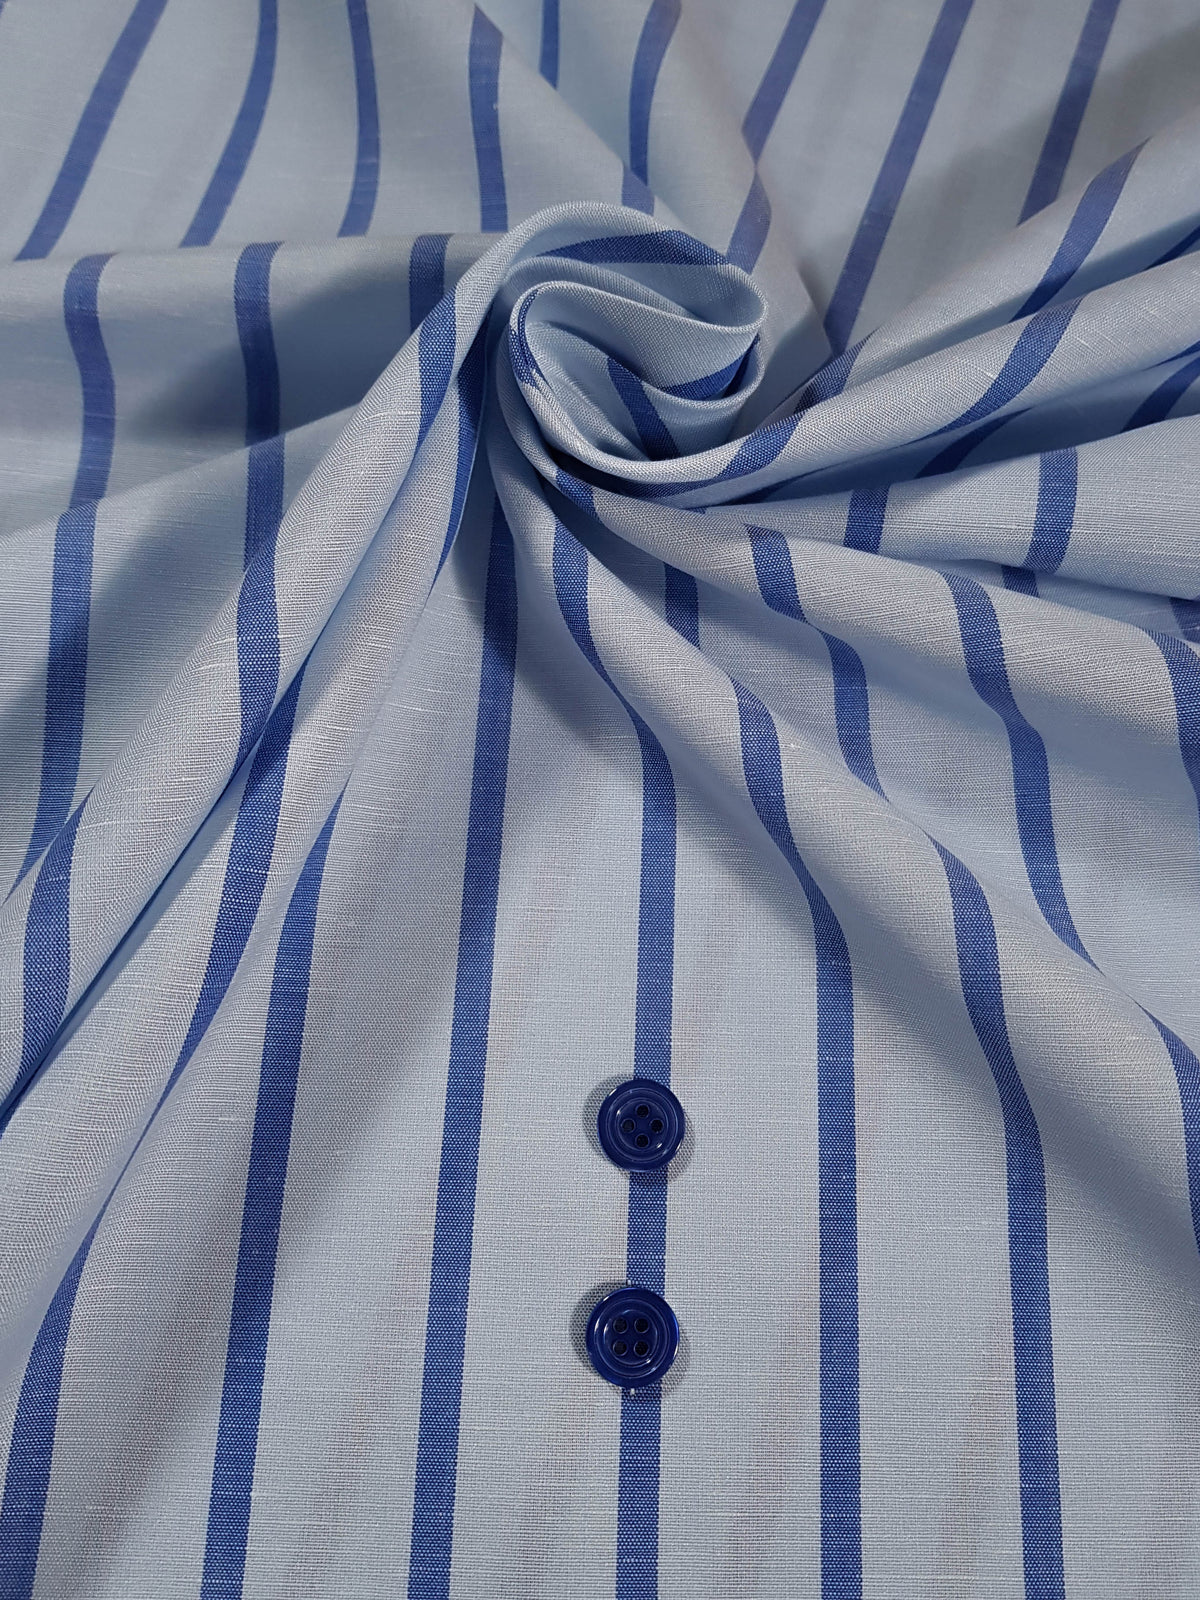 HUBERROSS Cotton Linen 70% Linen 30% Cotton  Cloth Made in Italy Width: 58&#39;&#39; / 150cm